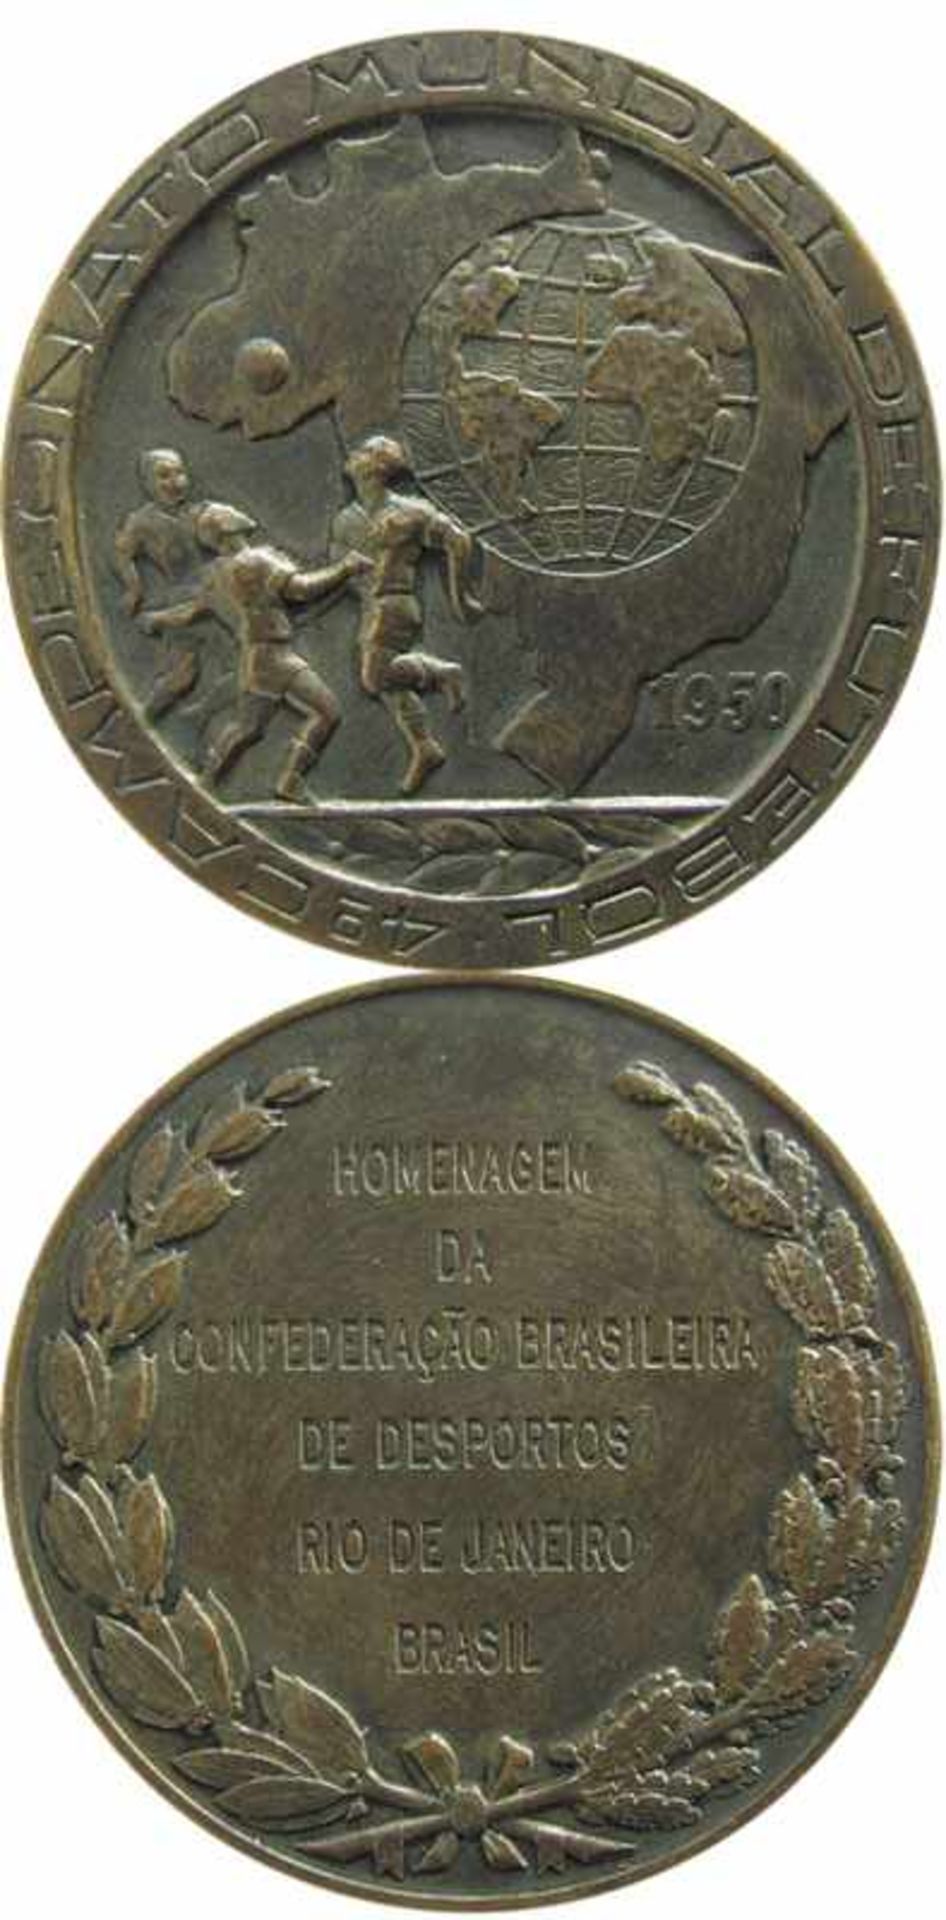 Participation Medal: World Cup 1950. - Participation medal: World Cup in Brazil 1950."4°